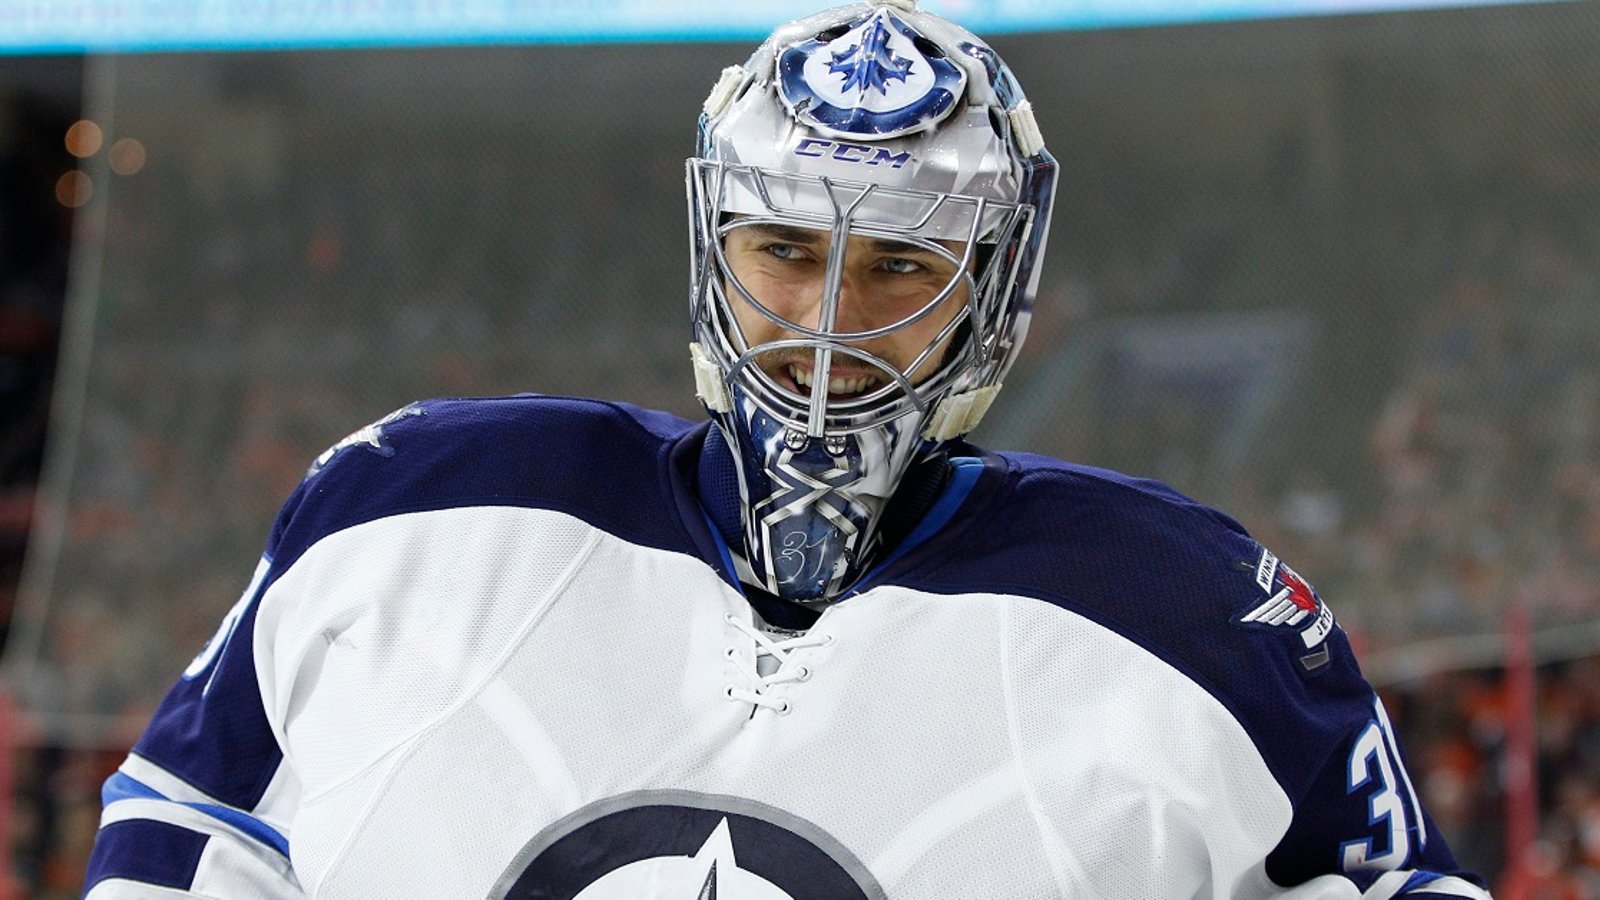 Breaking: Jets may have found the answer to their goaltending problems.